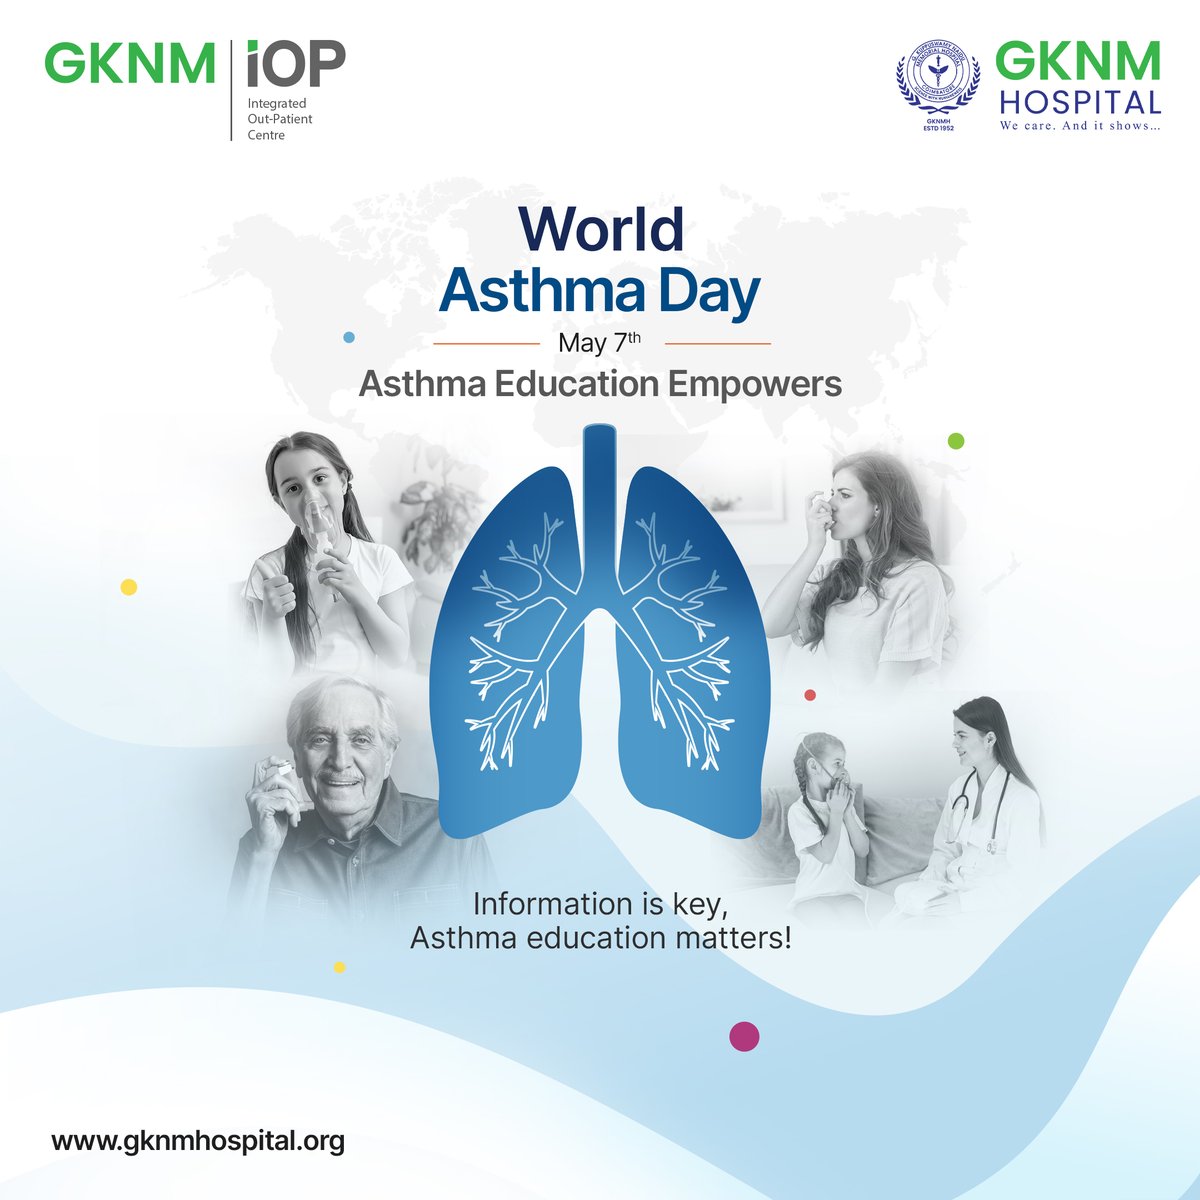 It is vital to empower and educate asthma patients and their families to understand and adhere to effective treatments, use asthma medications correctly, and seek your doctors help if any difficult circumstances arise #WorldAsthmaDay #AsthmaDay #GKNM #GKNMH #GKNMIOP #GKNMHospital